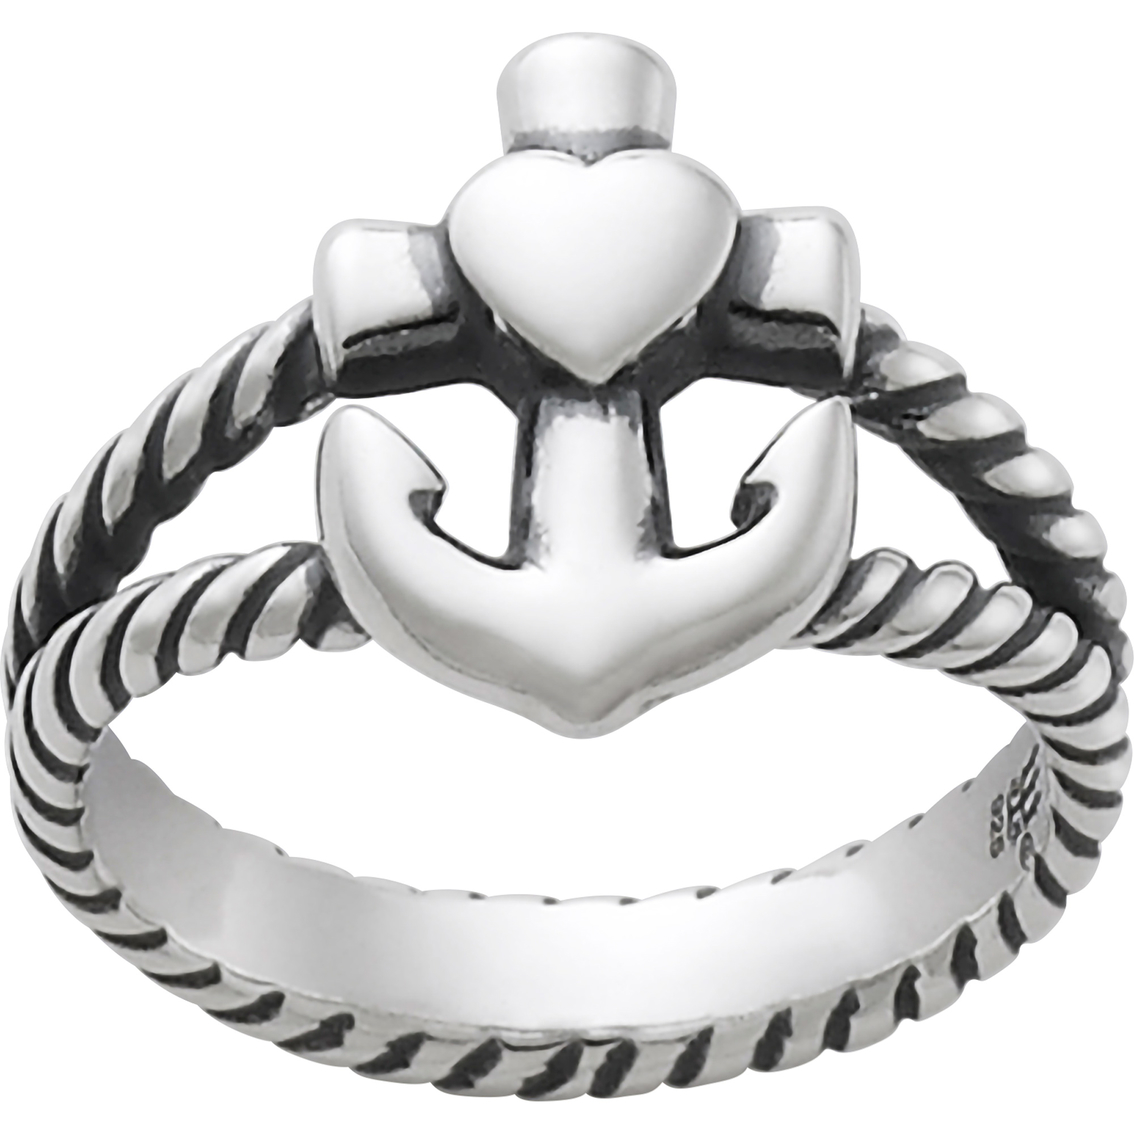 James Avery Faith Hope Love Twisted Rope Ring Silver Rings Jewelry